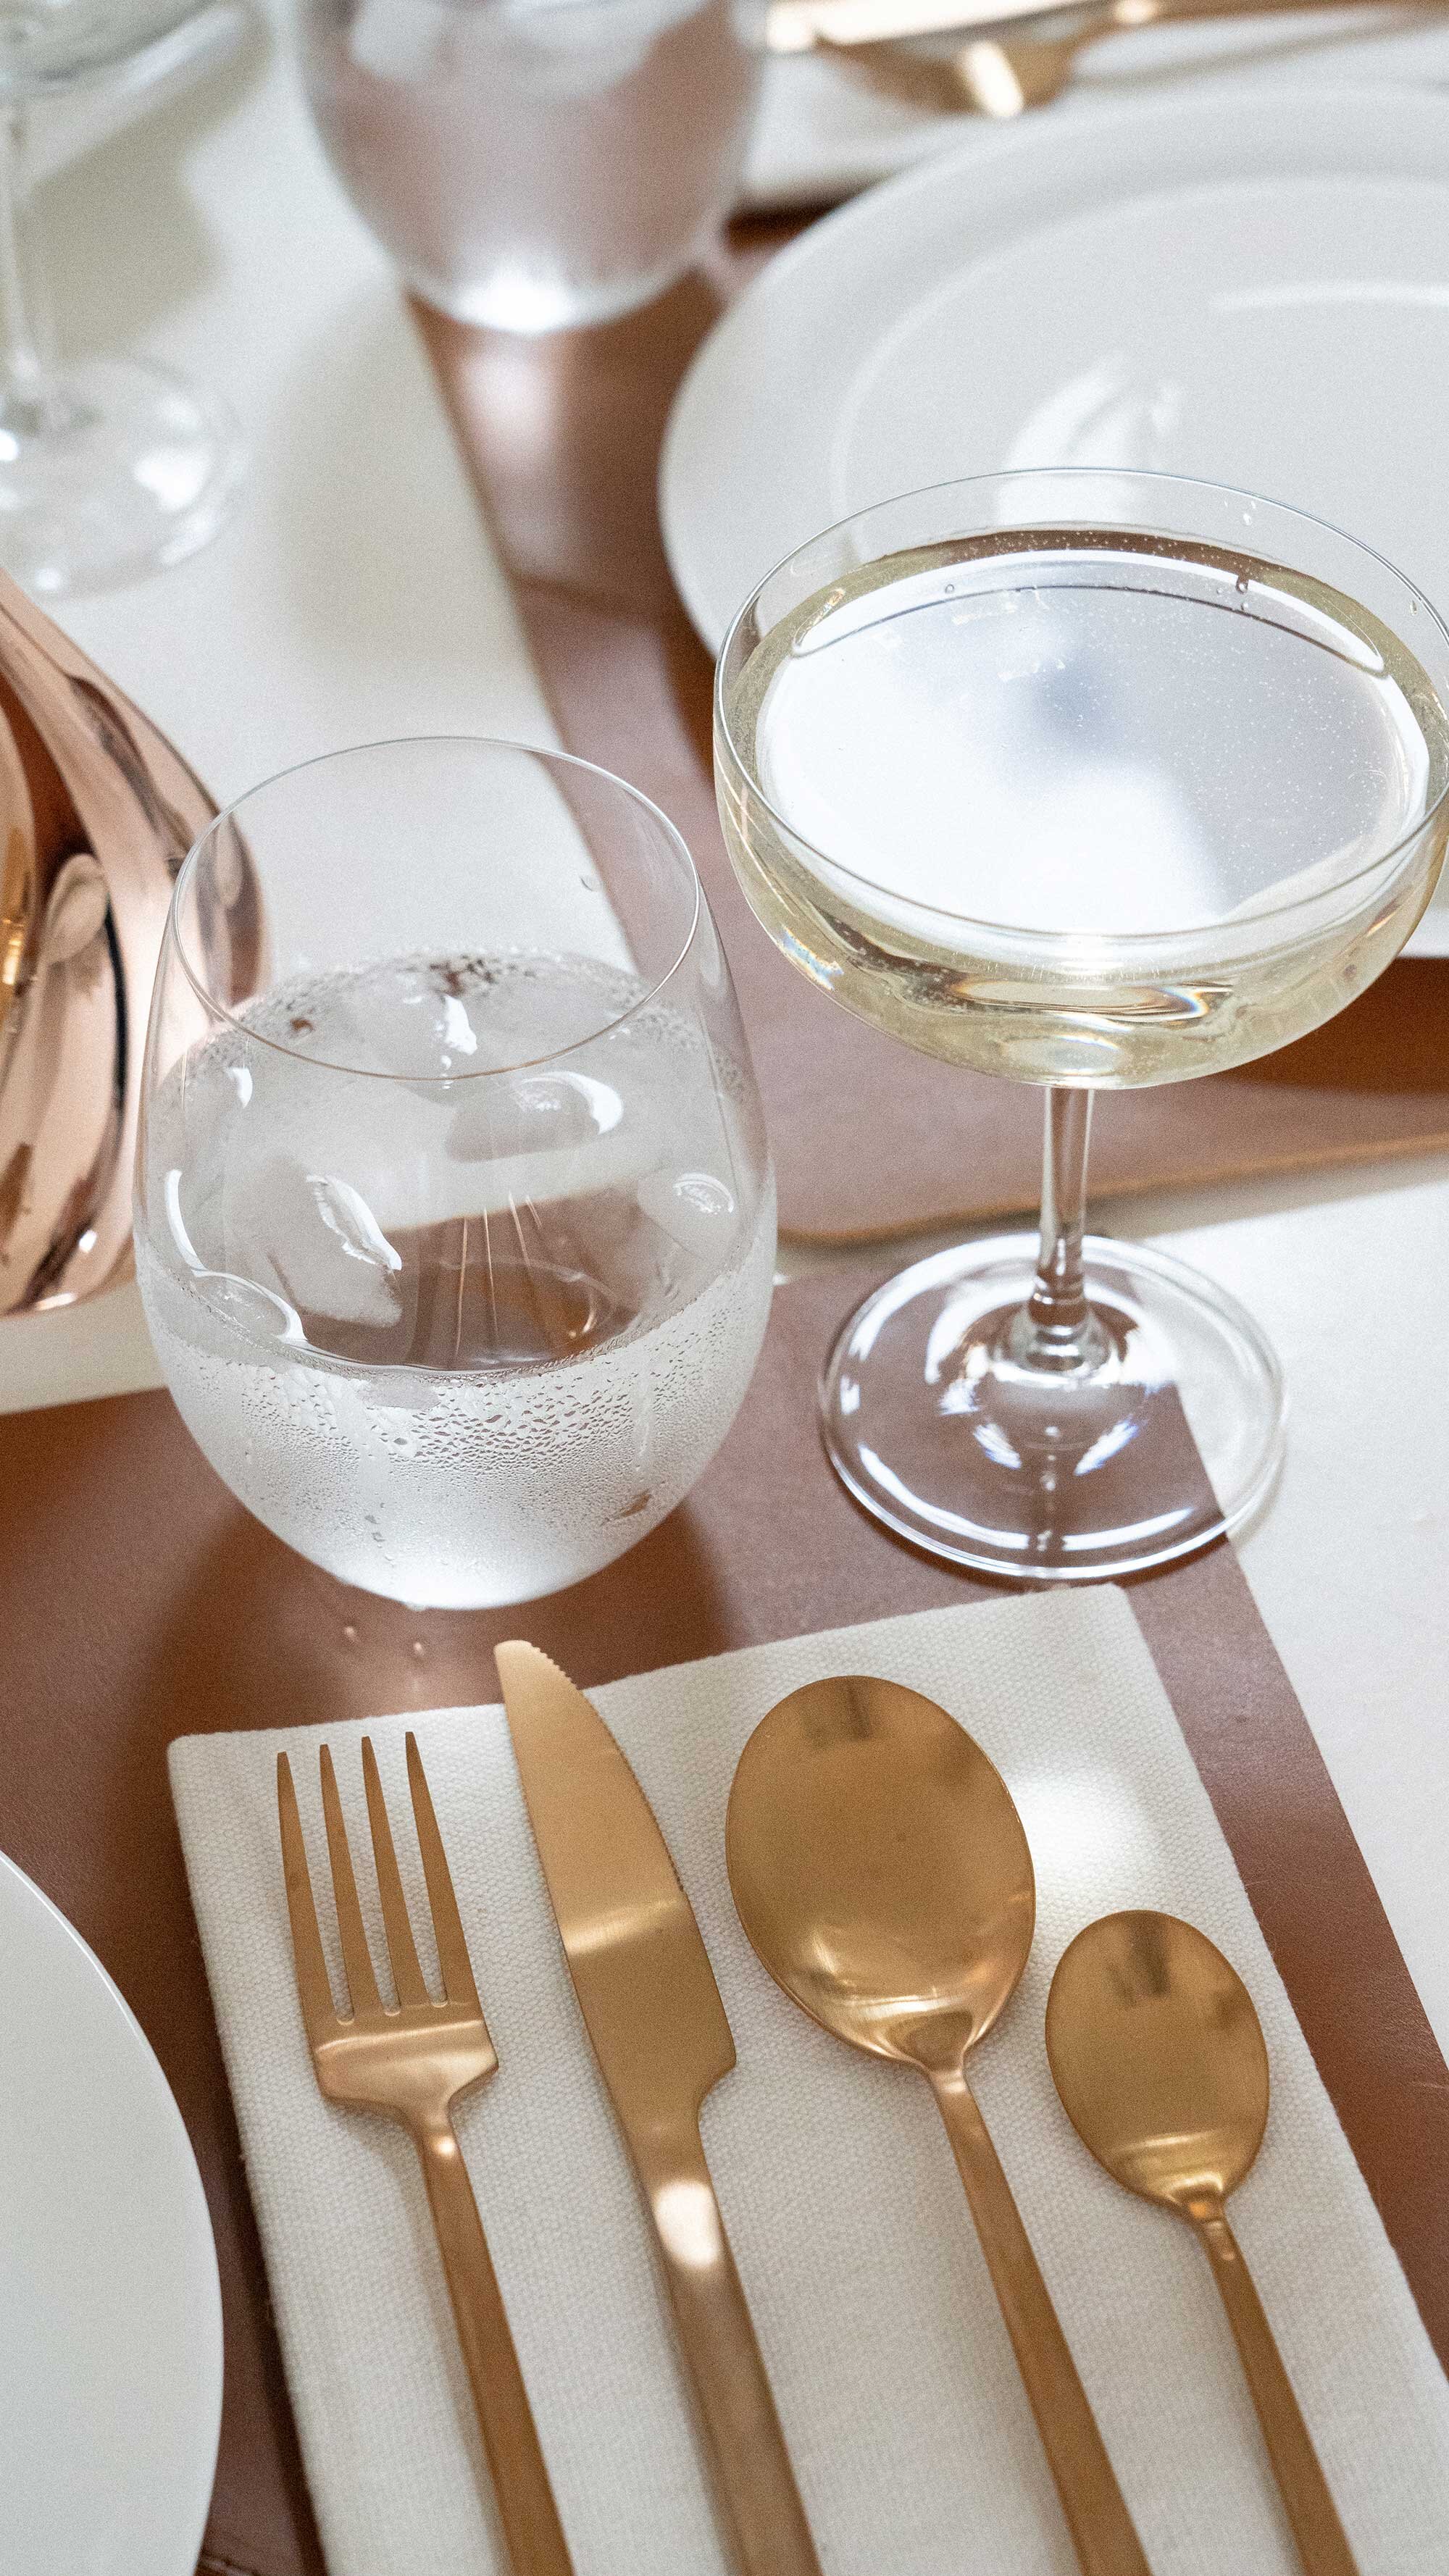 Thanksgiving table settings elegant gold. Sarah Butler of @sarahchristine Thanksgiving table settings featuring Georg Jensen Cobra Candleholder Set, tan leather placemats, and modern gold plated flatware with rustic dried flowers 32.jpg